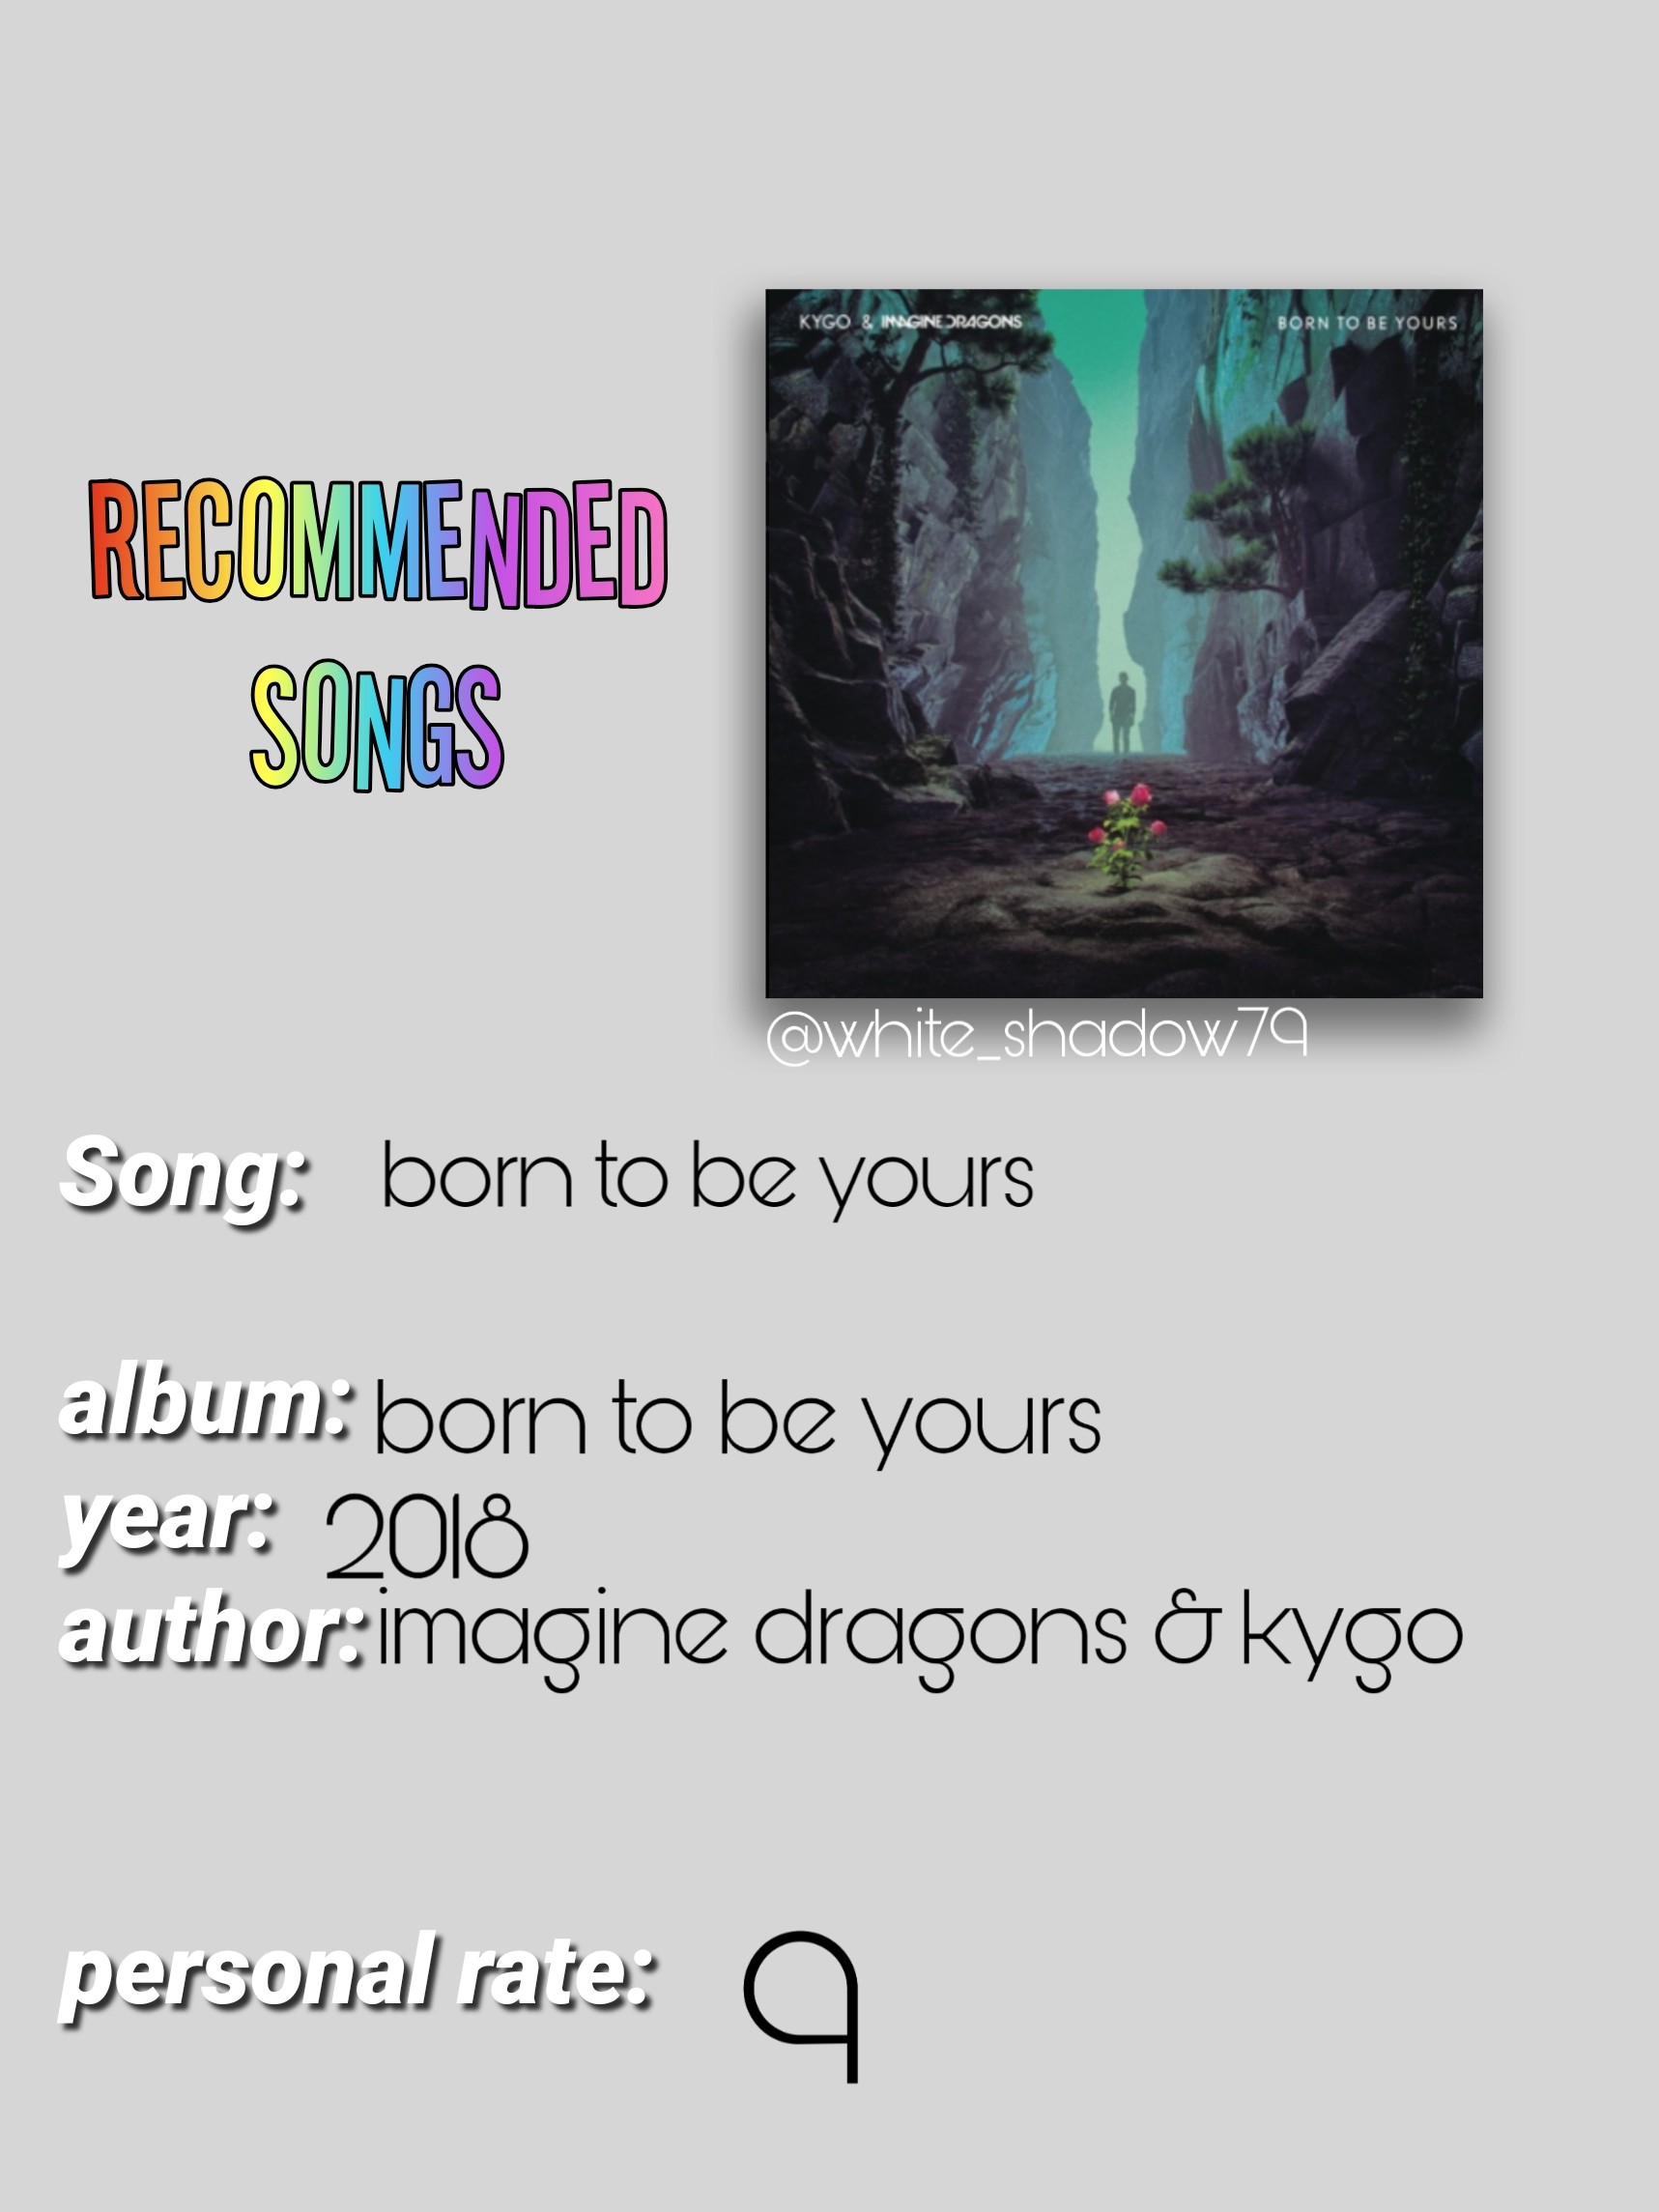 born to be yours imagine dragons album